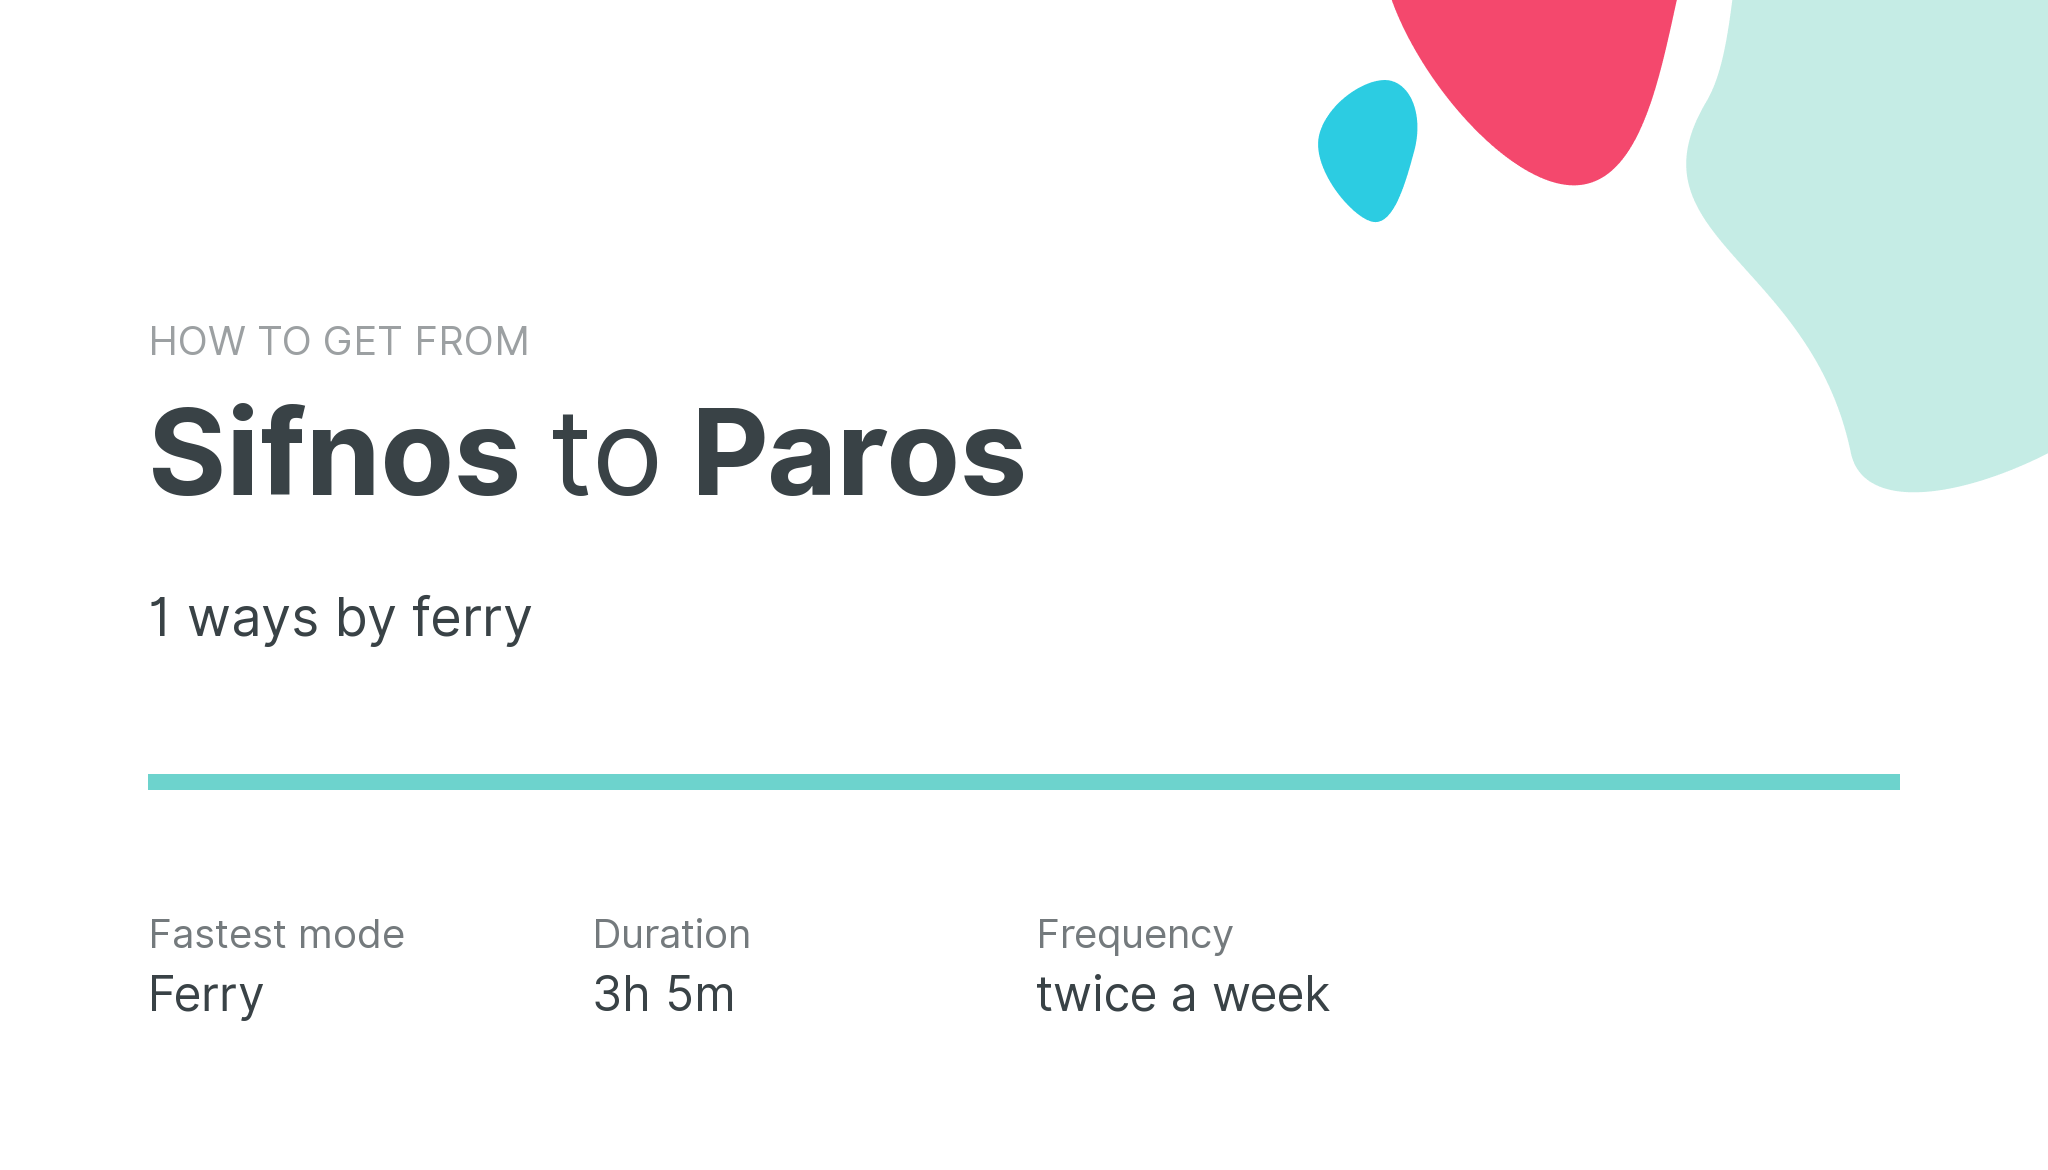 How do I get from Sifnos to Paros